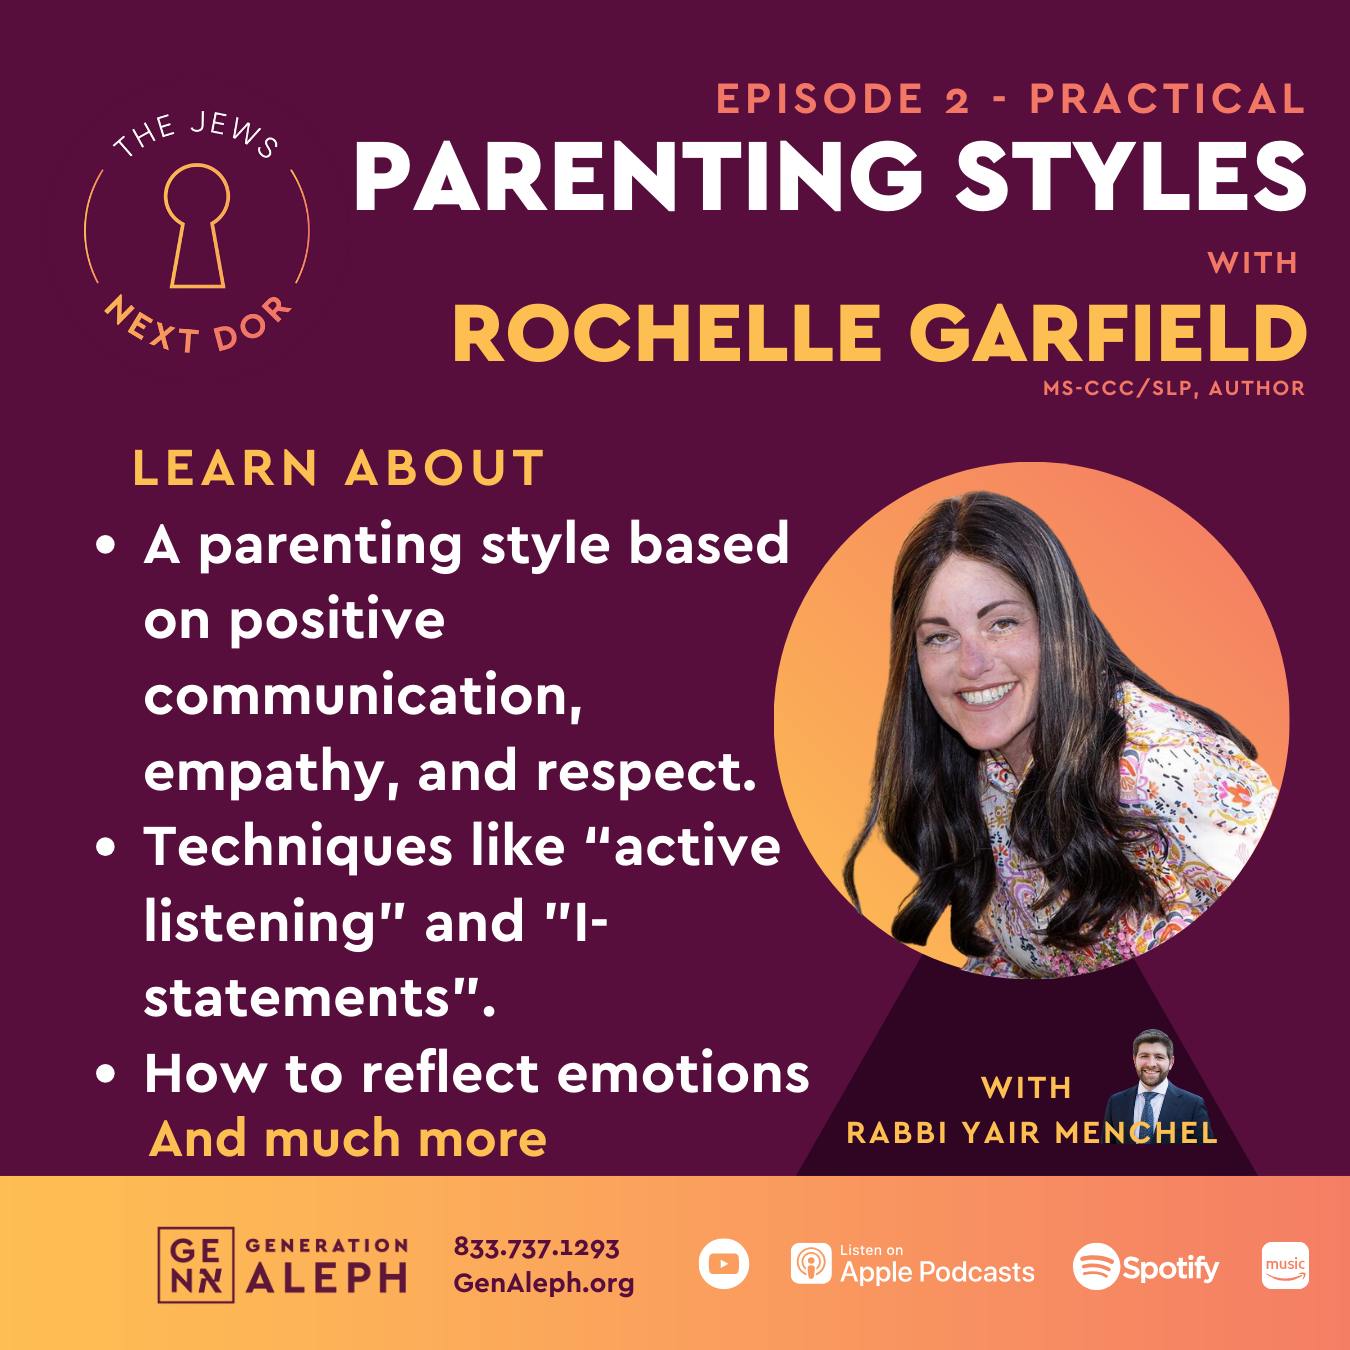 Compassion Instead of Control: Parenting Style for Hearing & Empowering Children | Rochelle Garfield